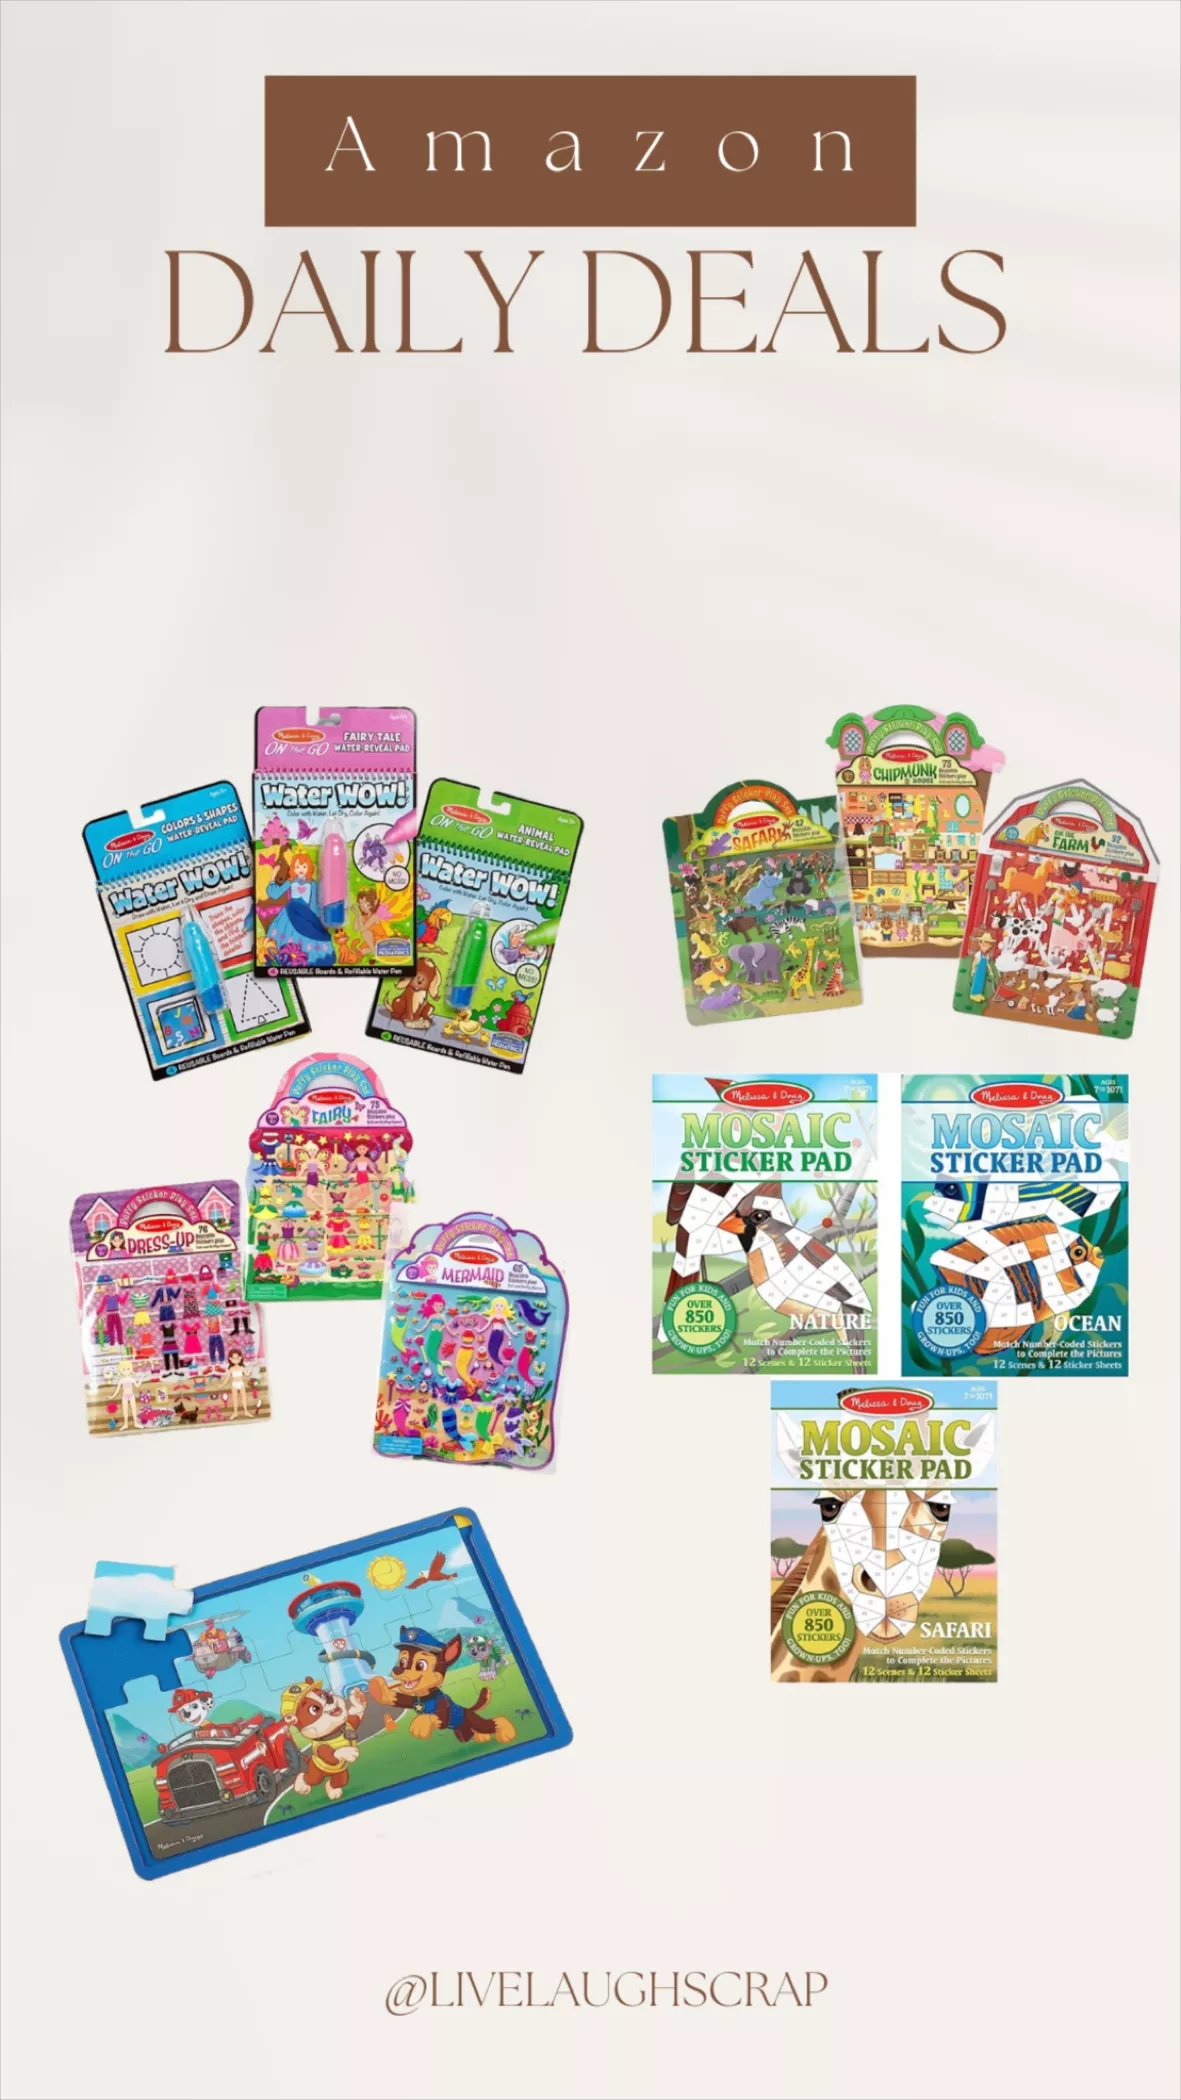 Water Wow! Bundle - Colors & Shapes, Fairy Tales and Animals